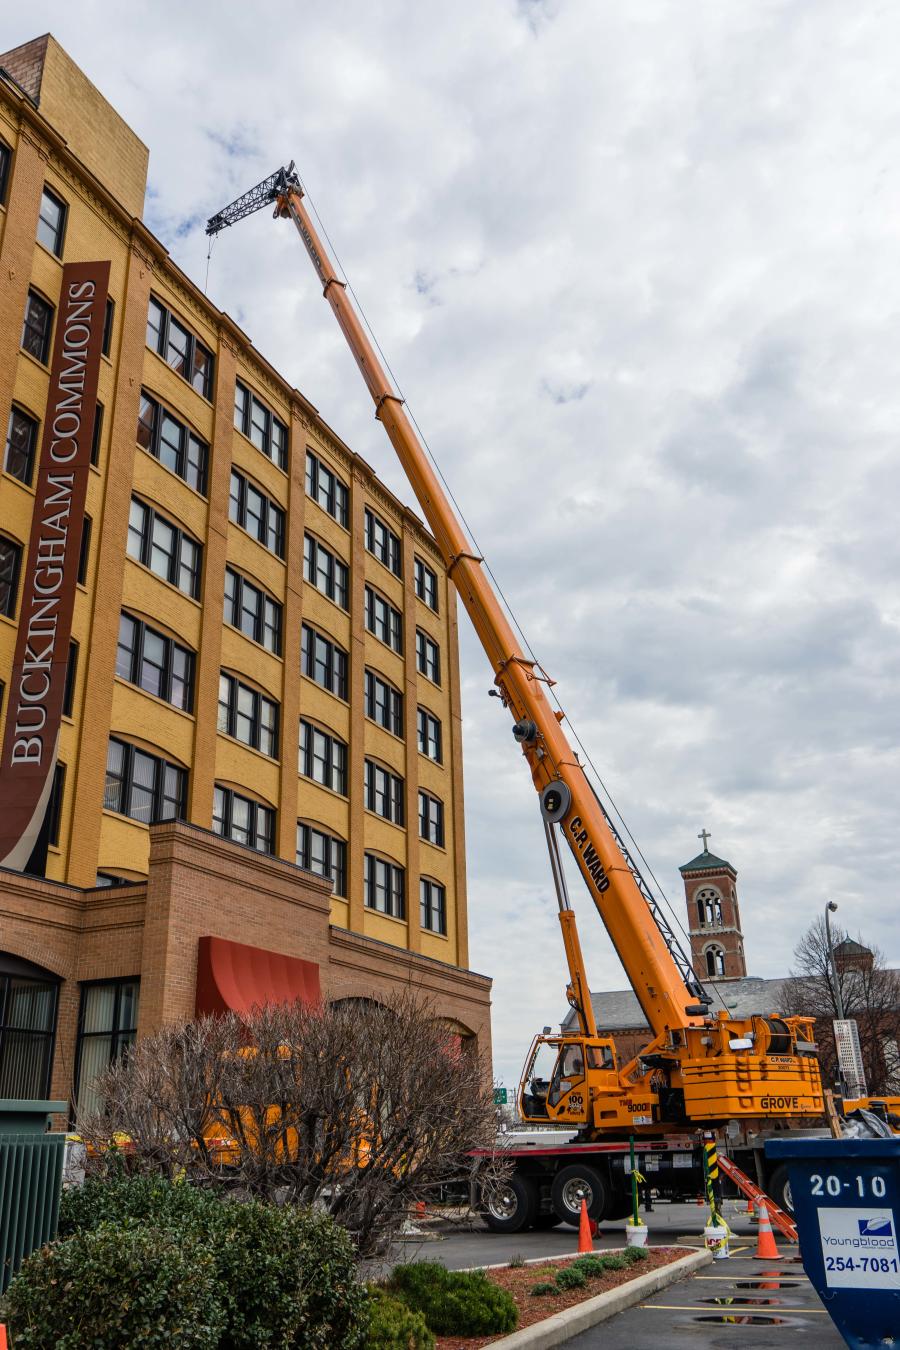 C.P. Ward uses a Grove TMS9000E specifically for projects that demand mobile cranes that can quickly get on and off the job site.